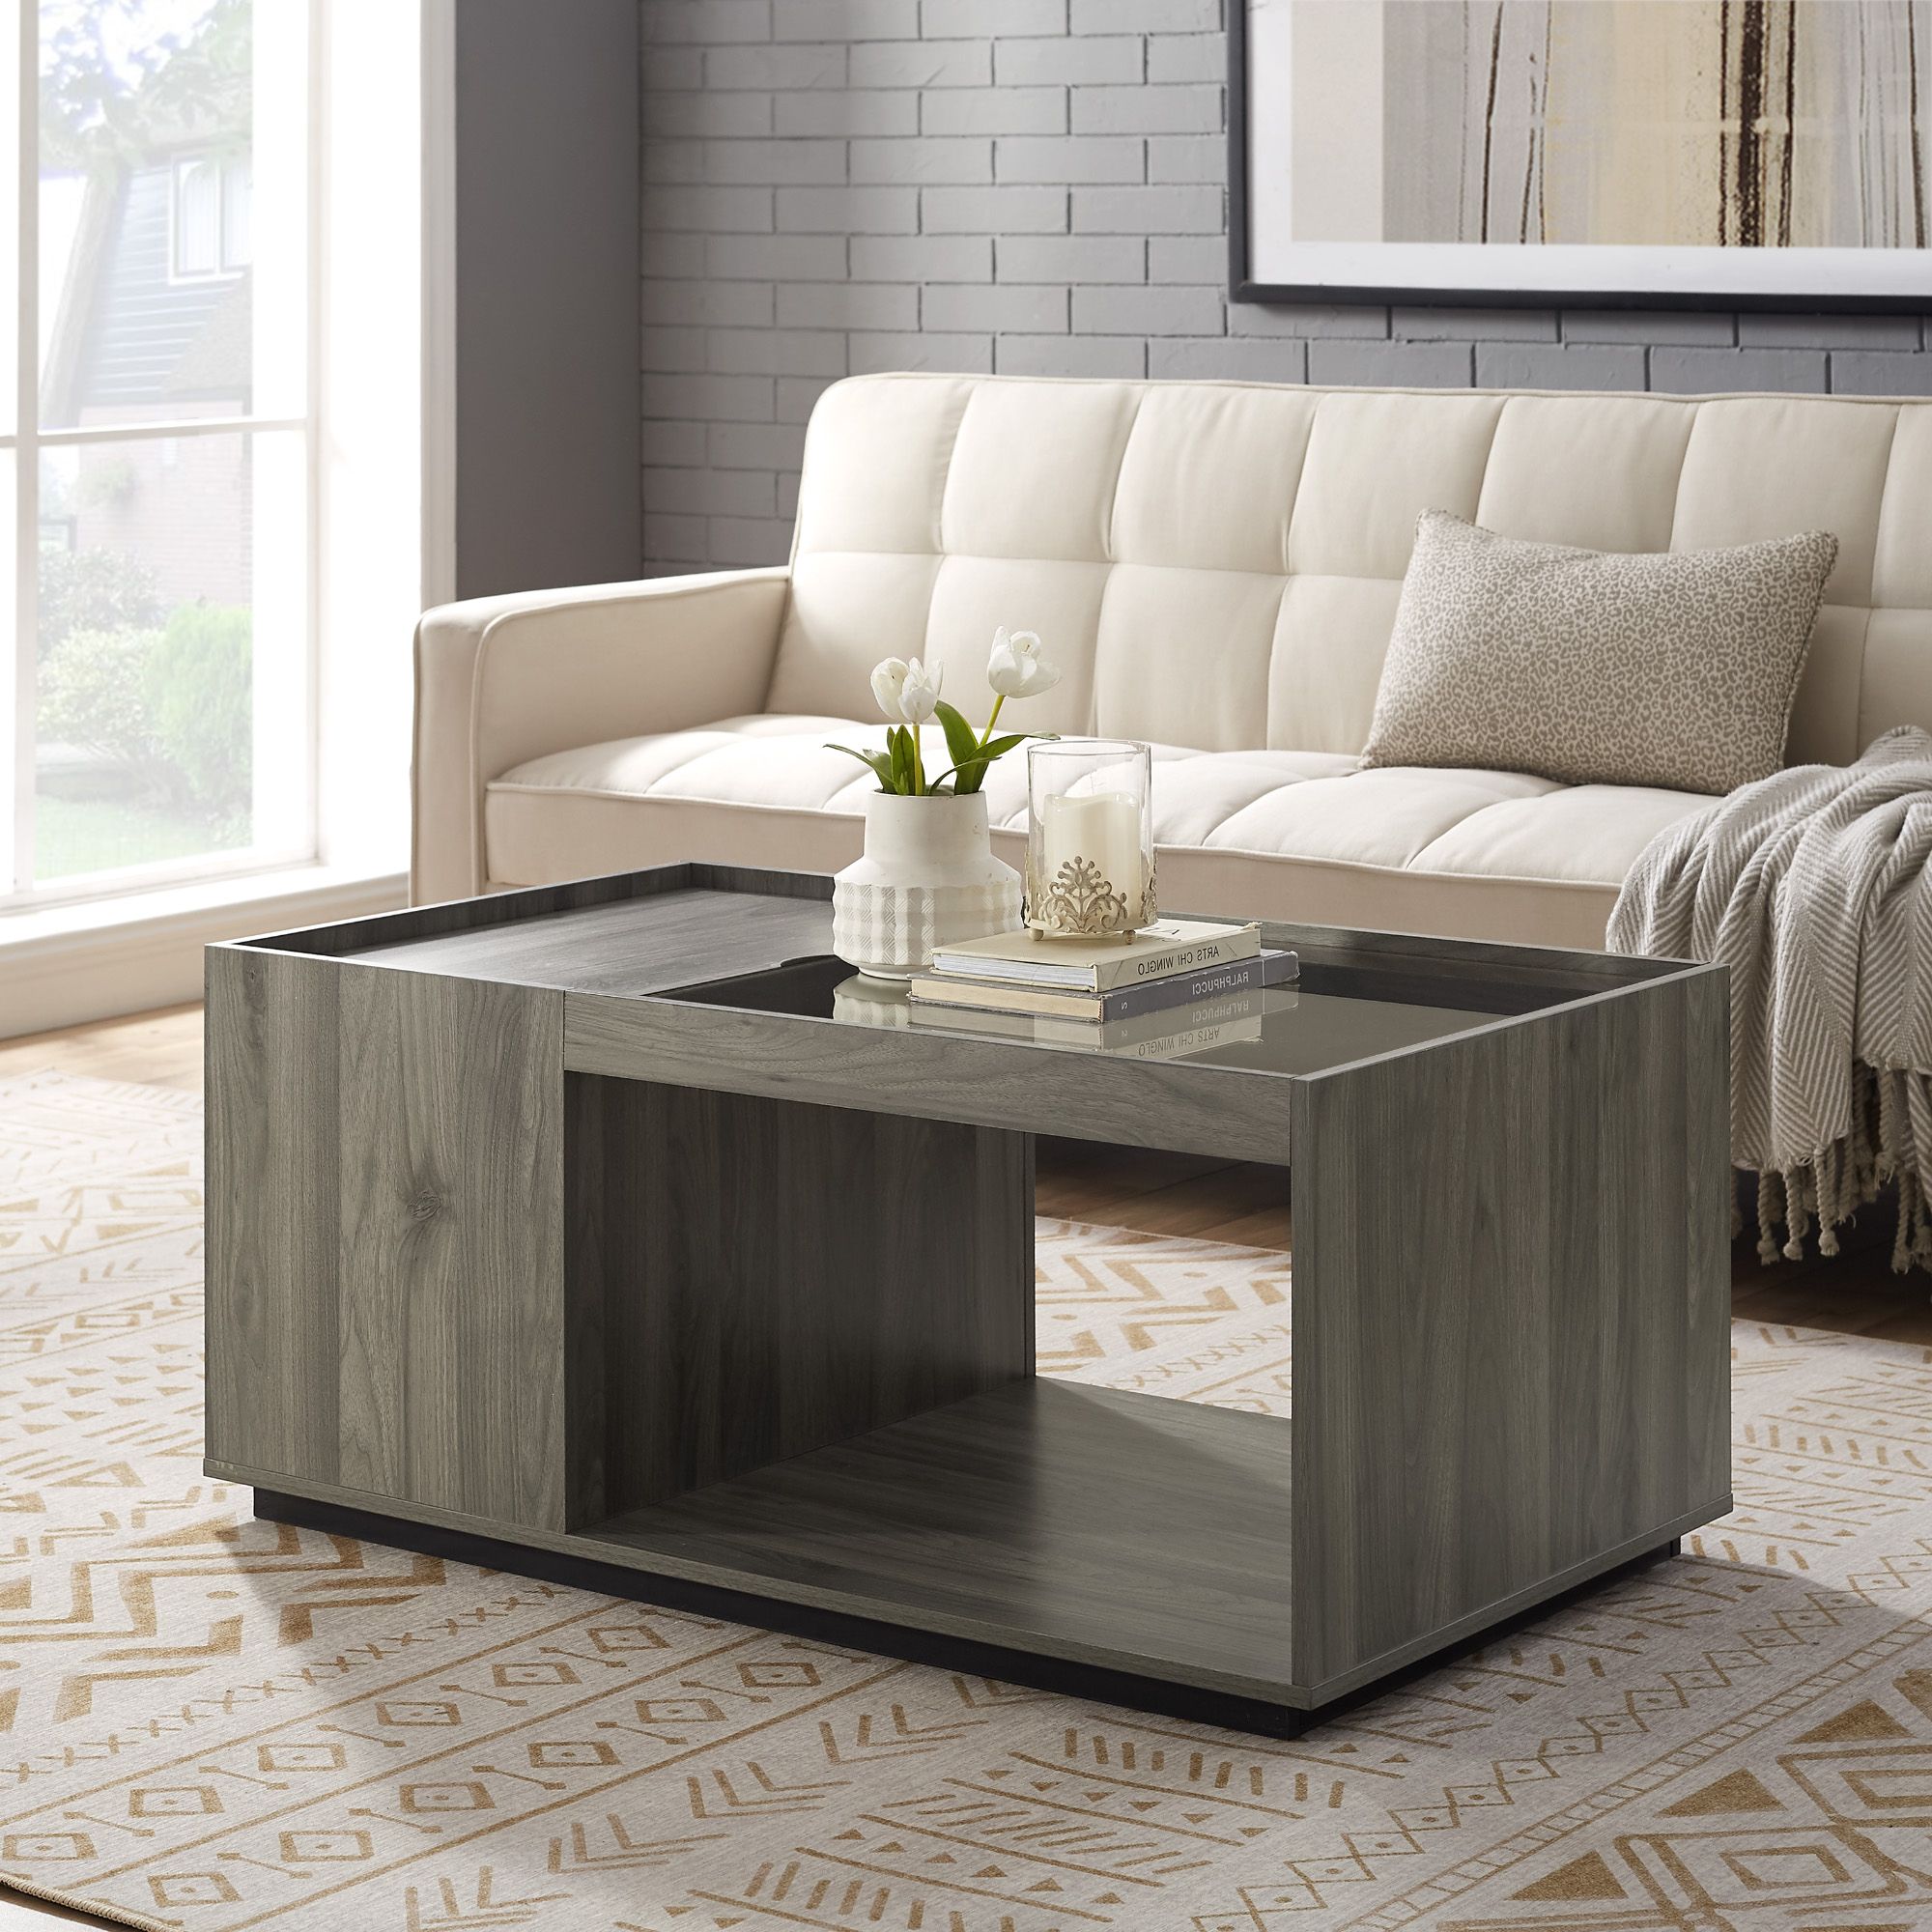 Manor Park Acadia Modern Lift Top Coffee Table, Slate Grey – Walmart With Regard To Widely Used Gray And Black Coffee Tables (View 4 of 10)